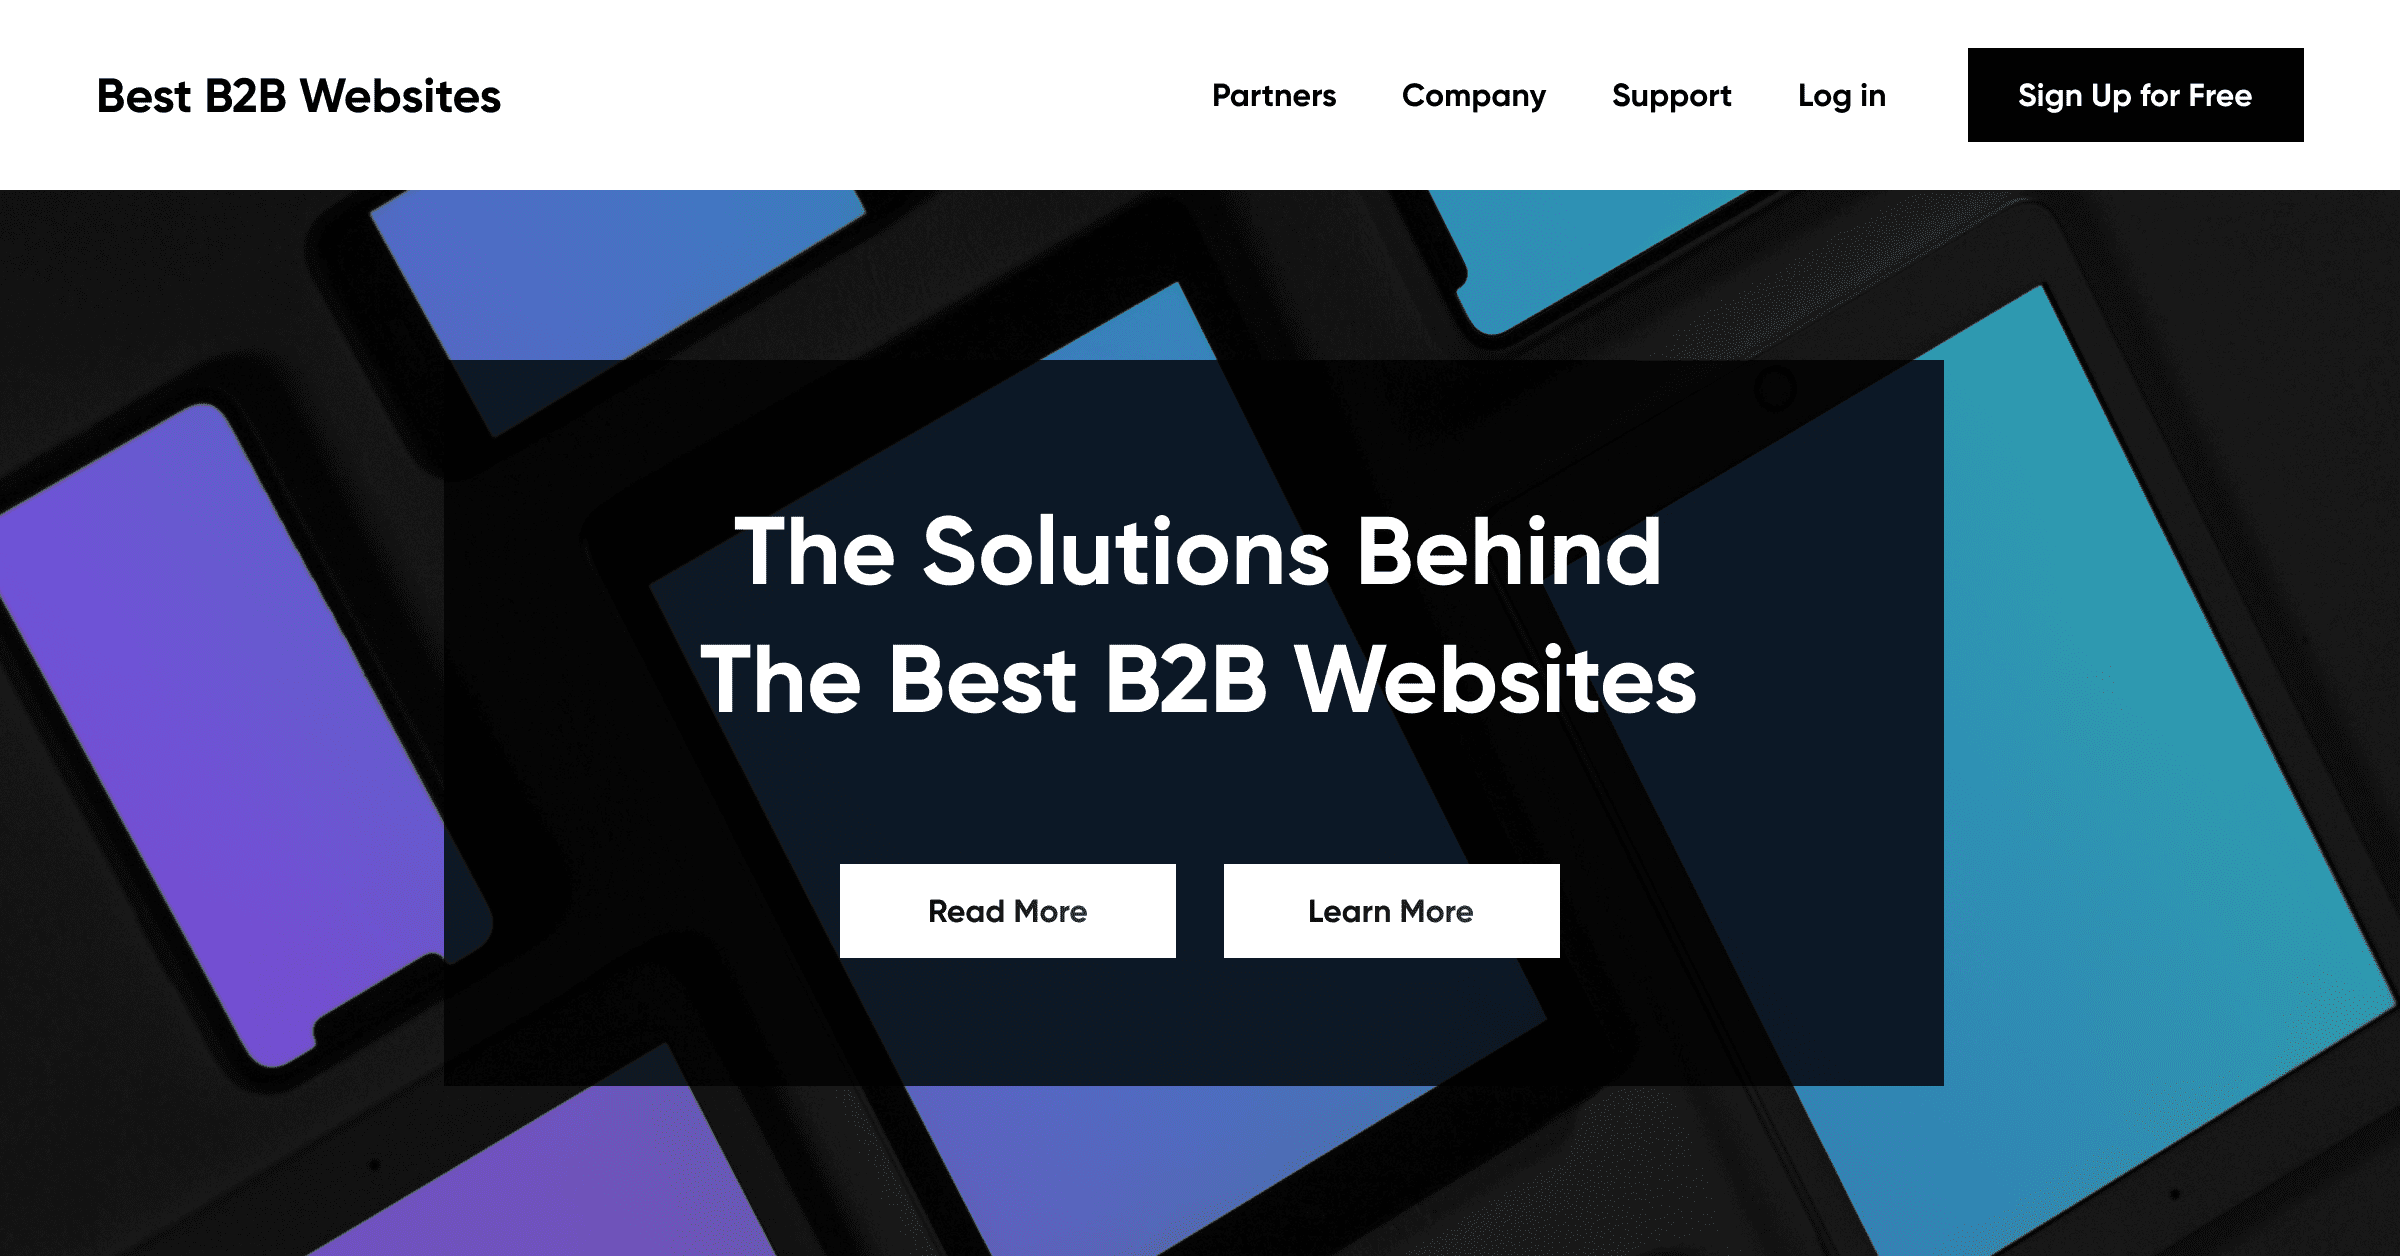 The Solutions Behind The Best B2B Websites